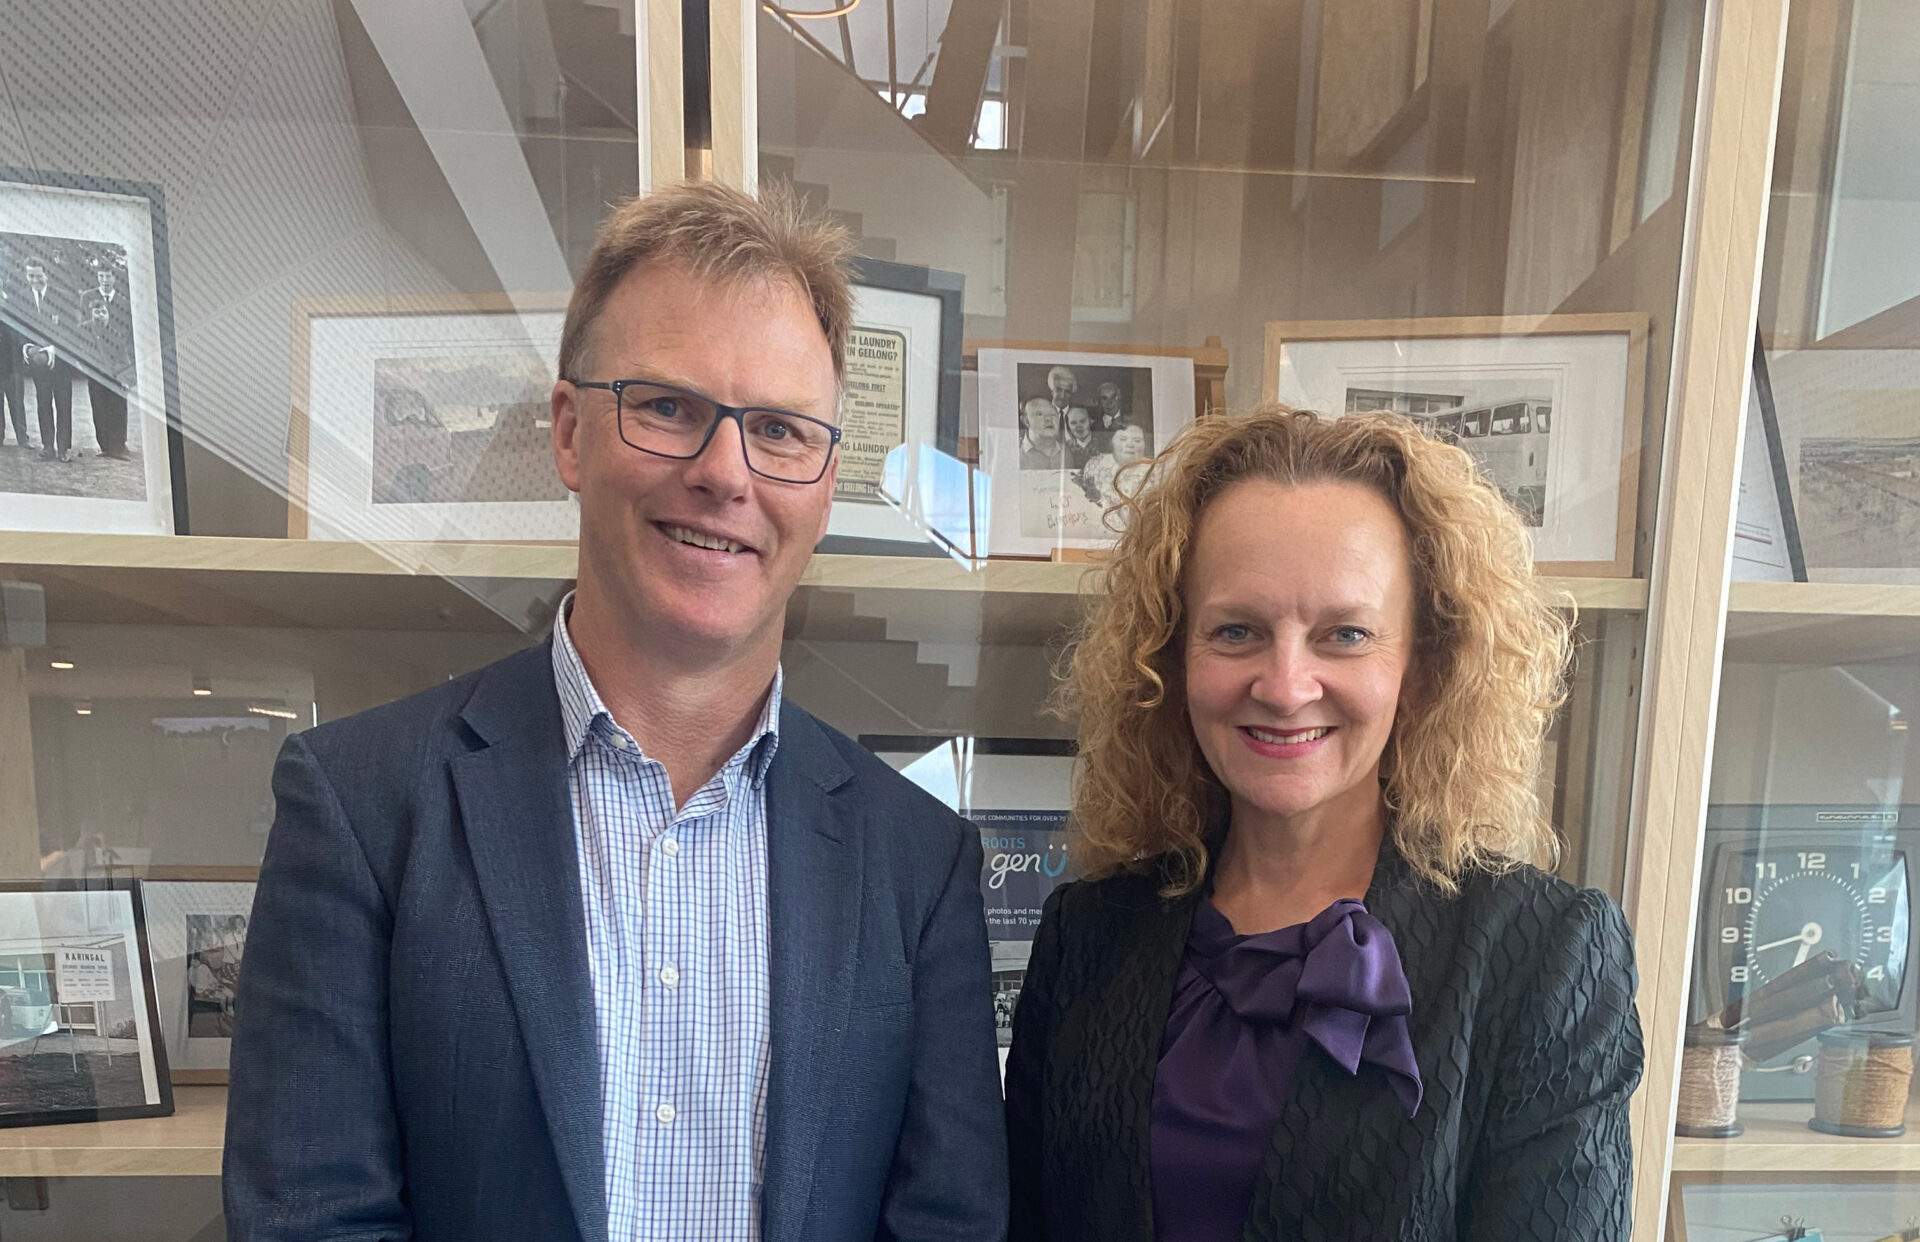 Li-Ve Tasmania CEO, Darren Mathewson stands beside genU CEO, Clare Amies at the genU Support Hub. Darren wears stone coloured pants and a navy jacket and a pale blue shirt. Clare is wearing a black dress and jacket.